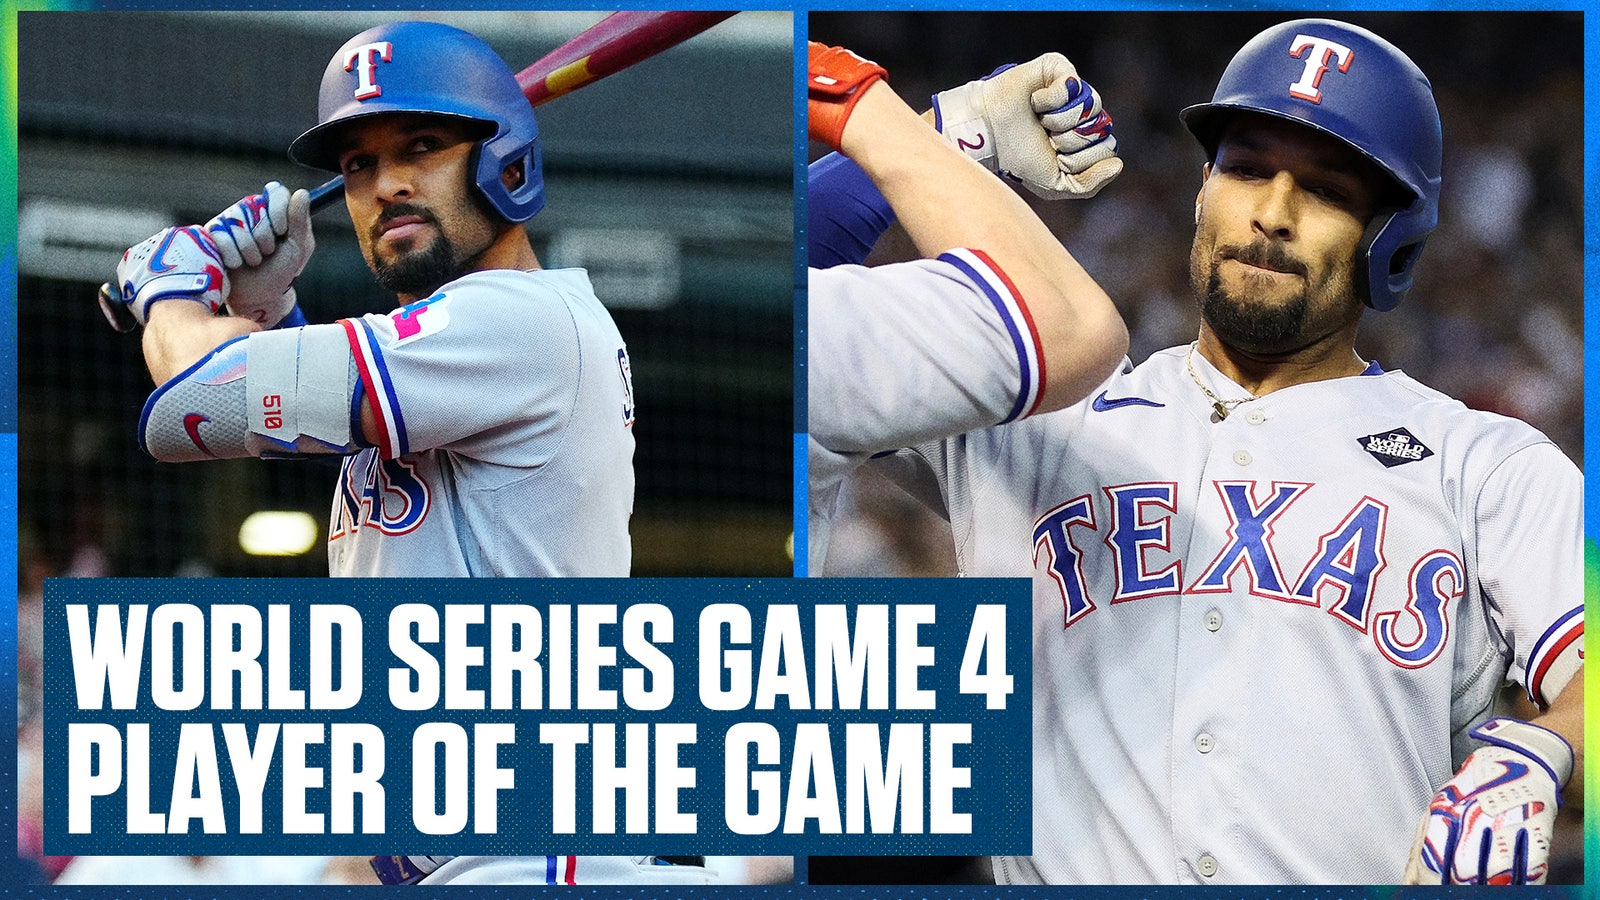 Rangers' Marcus Semien is World Series Game 4 Player of the Game